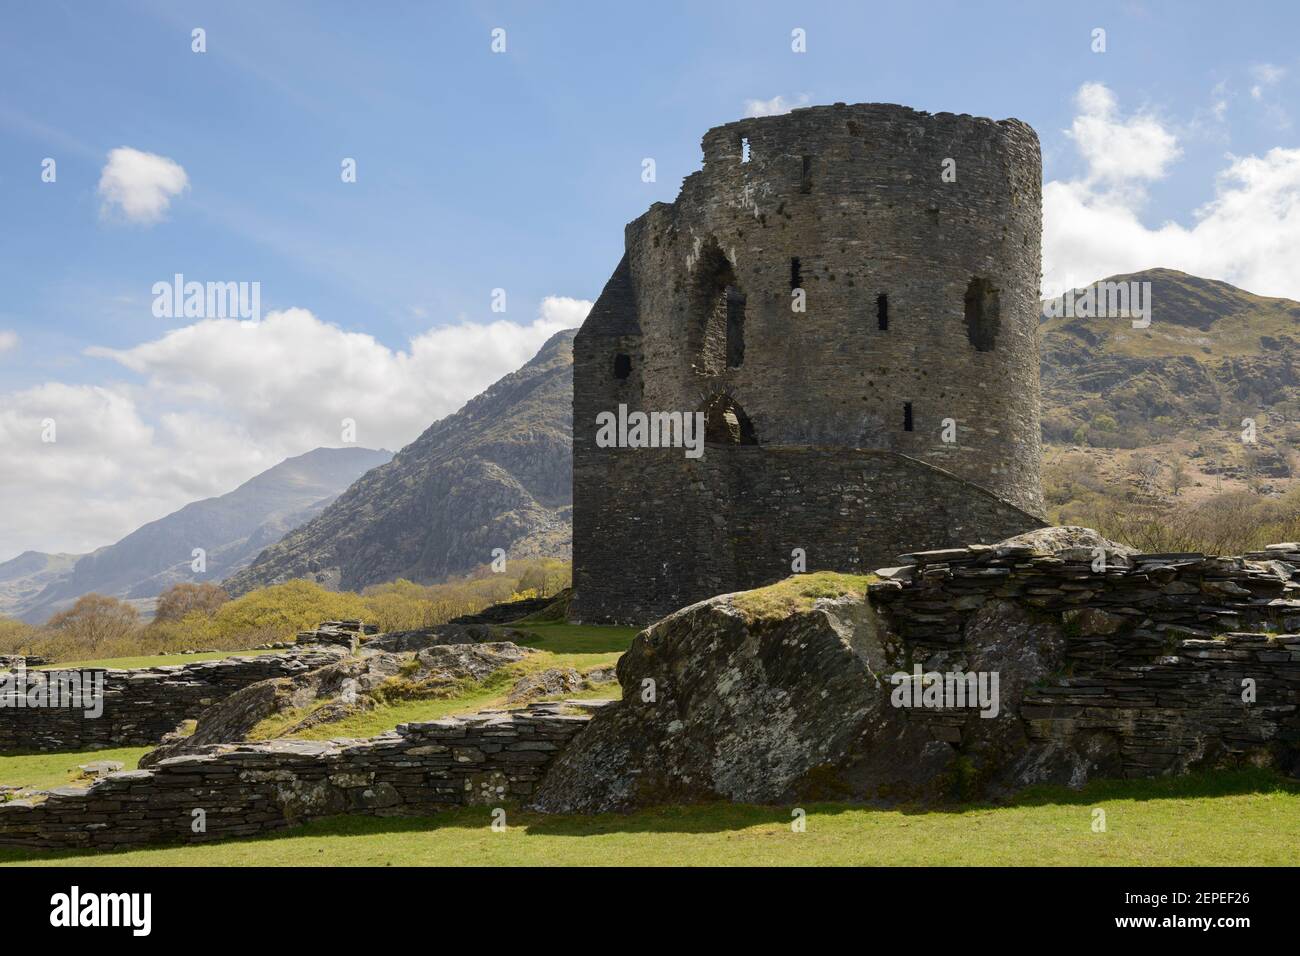 Doldabarn Castle in Llanberis, Snowdonia, on a spring afternoon. Stock Photo